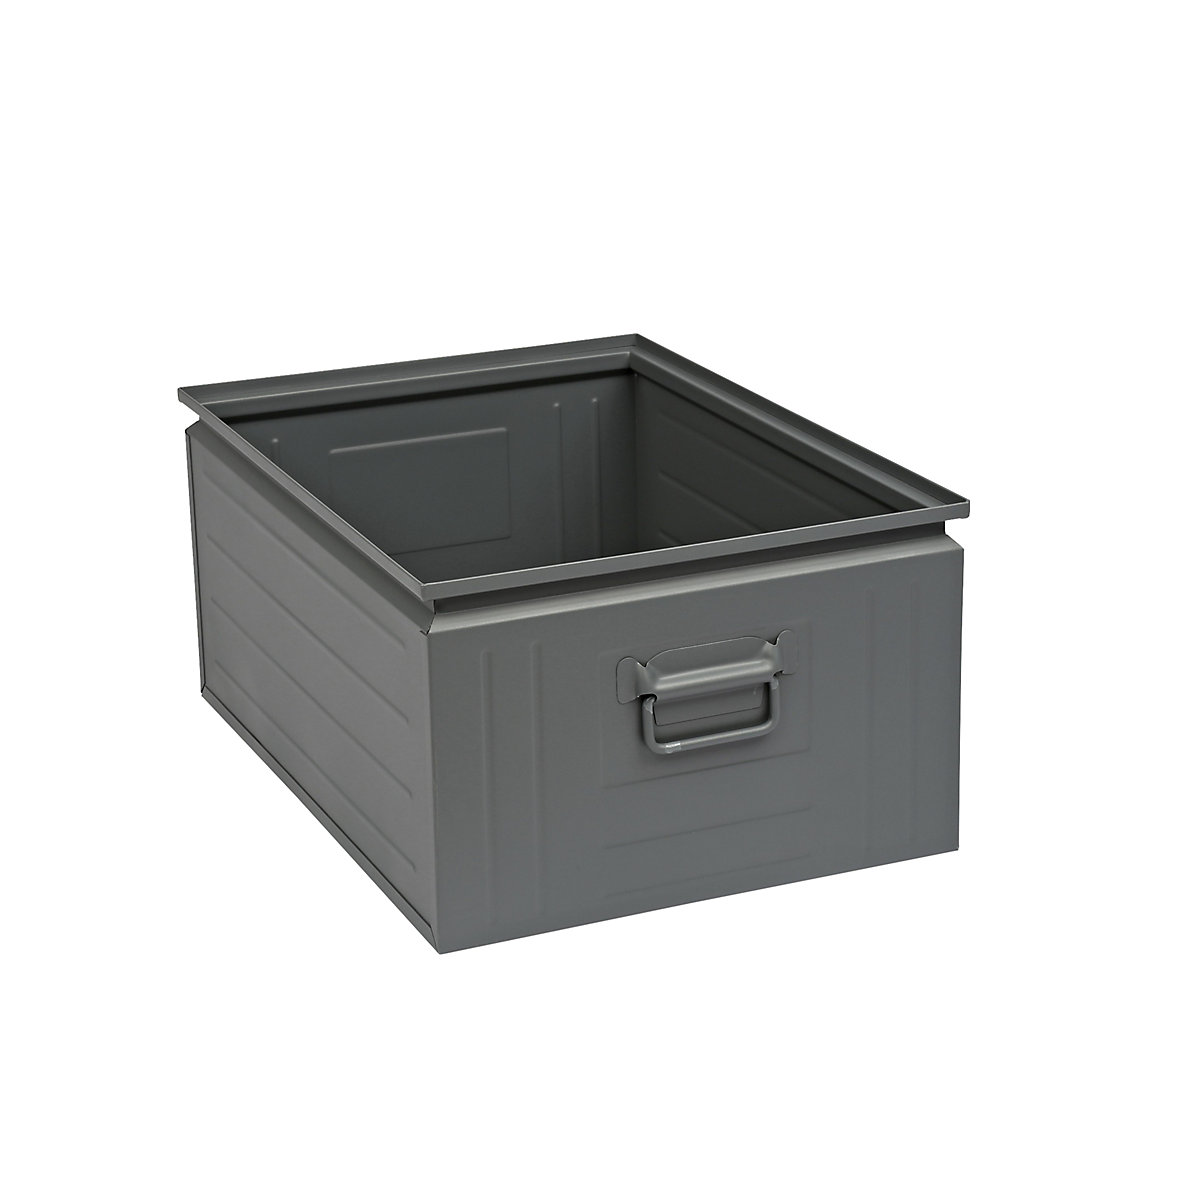 Stacking container made of sheet steel, capacity approx. 80 l, basalt grey RAL 7012